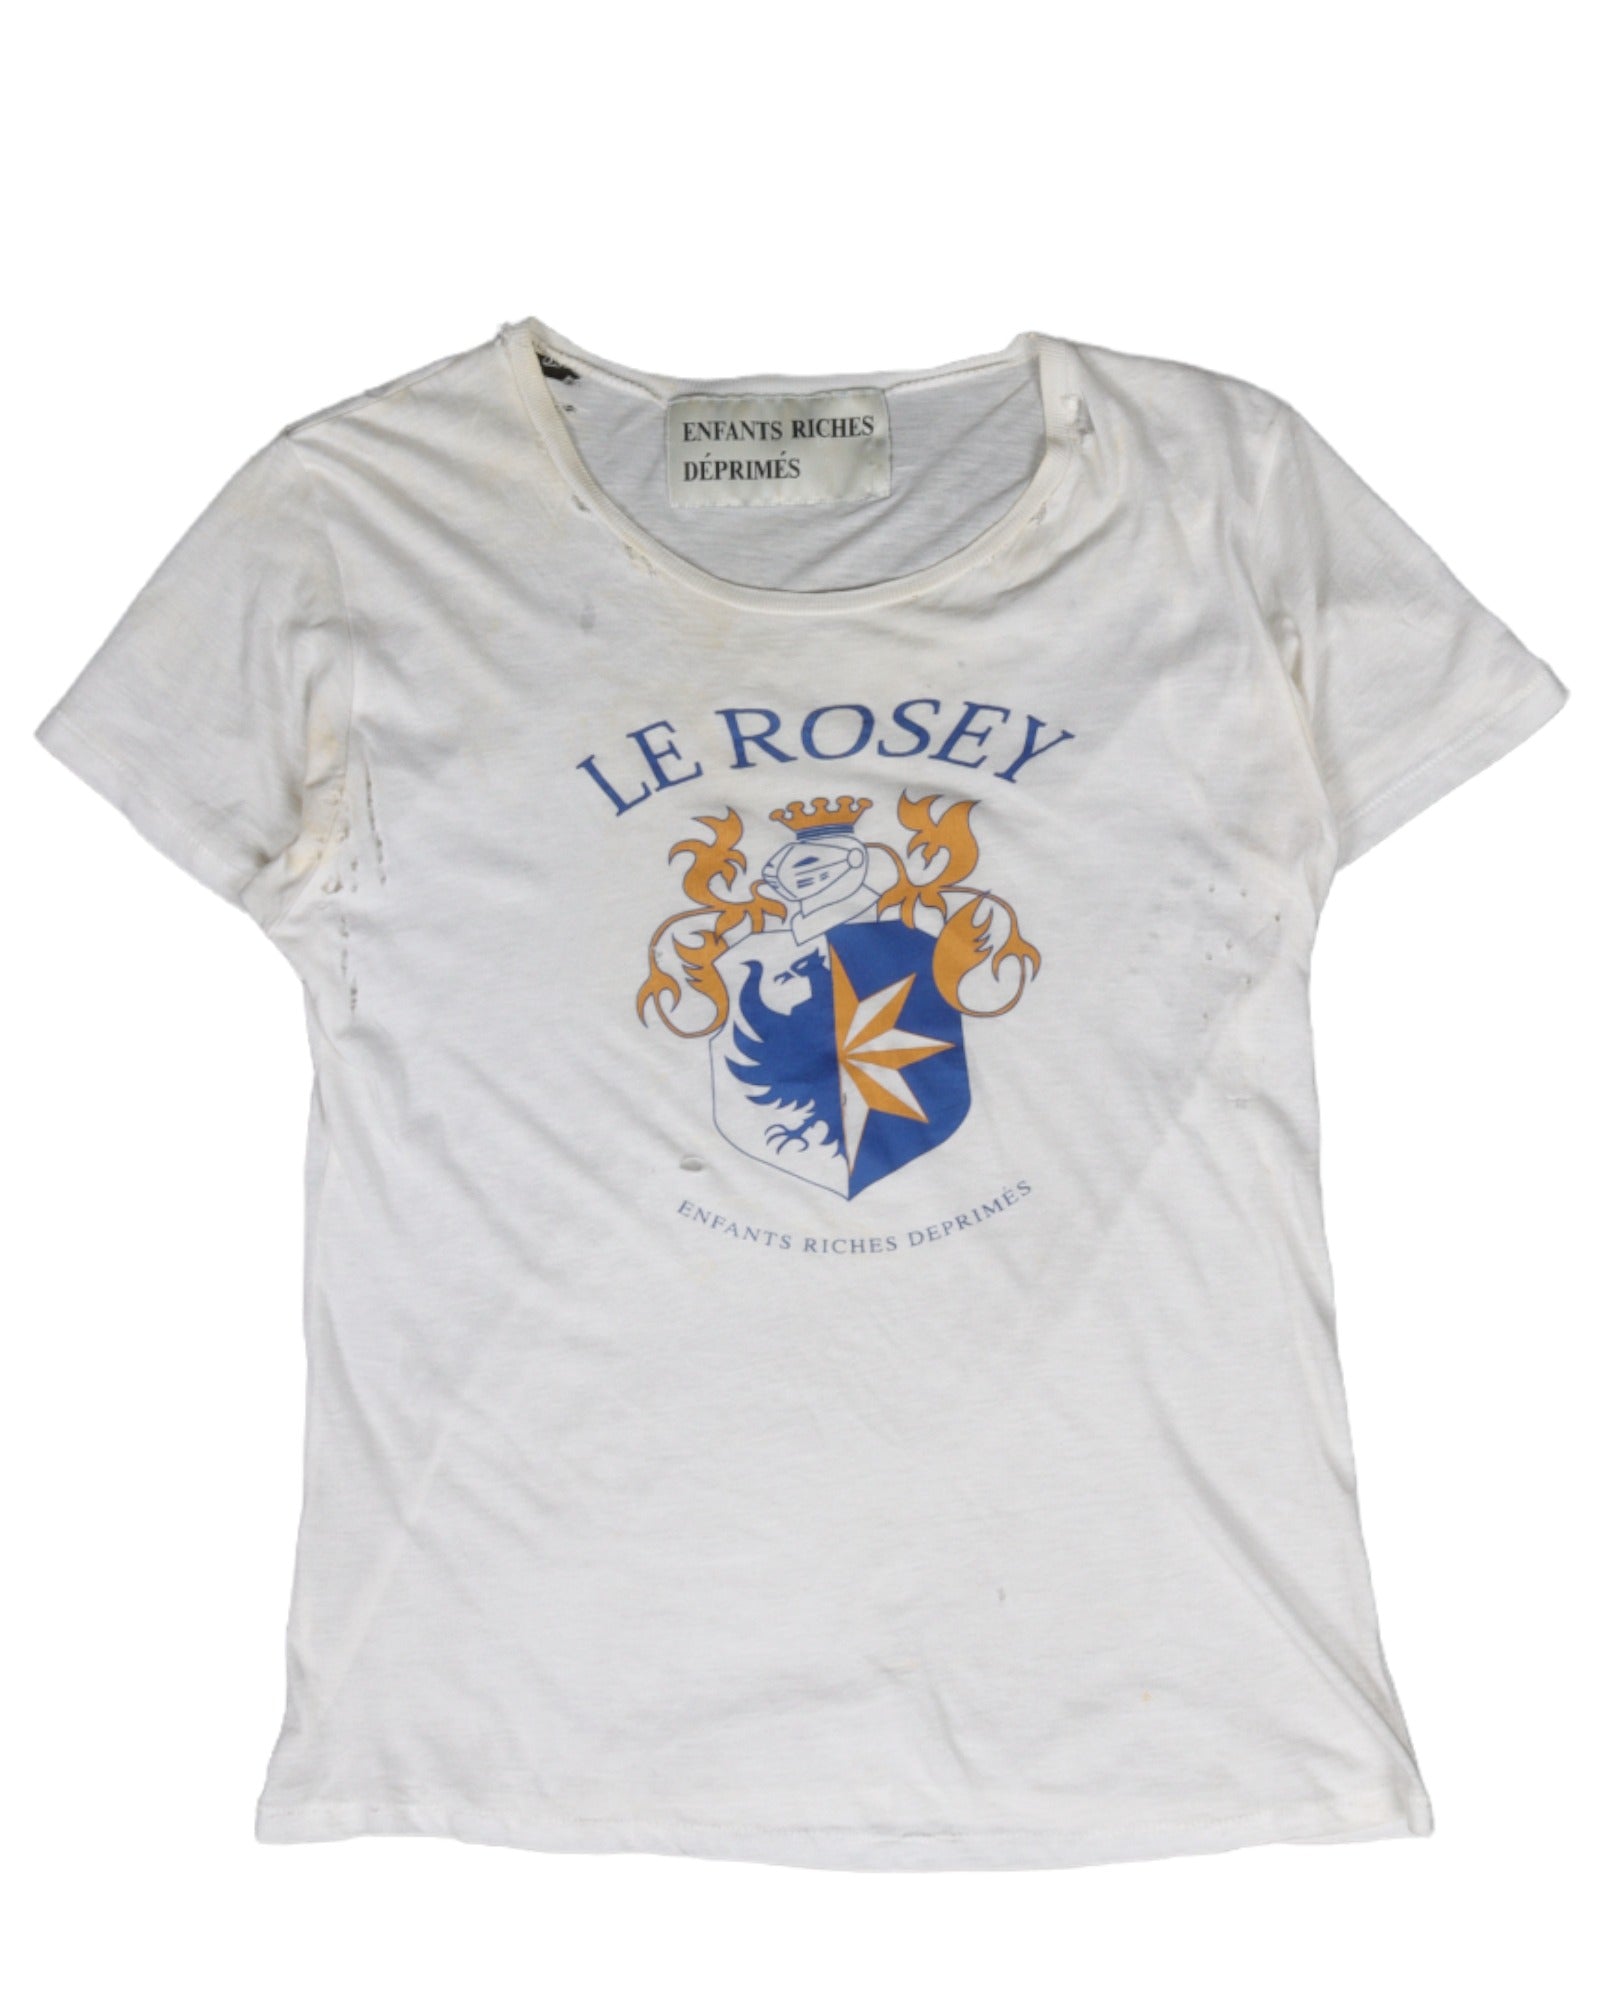 "Le Rosey" Distressed T-Shirt